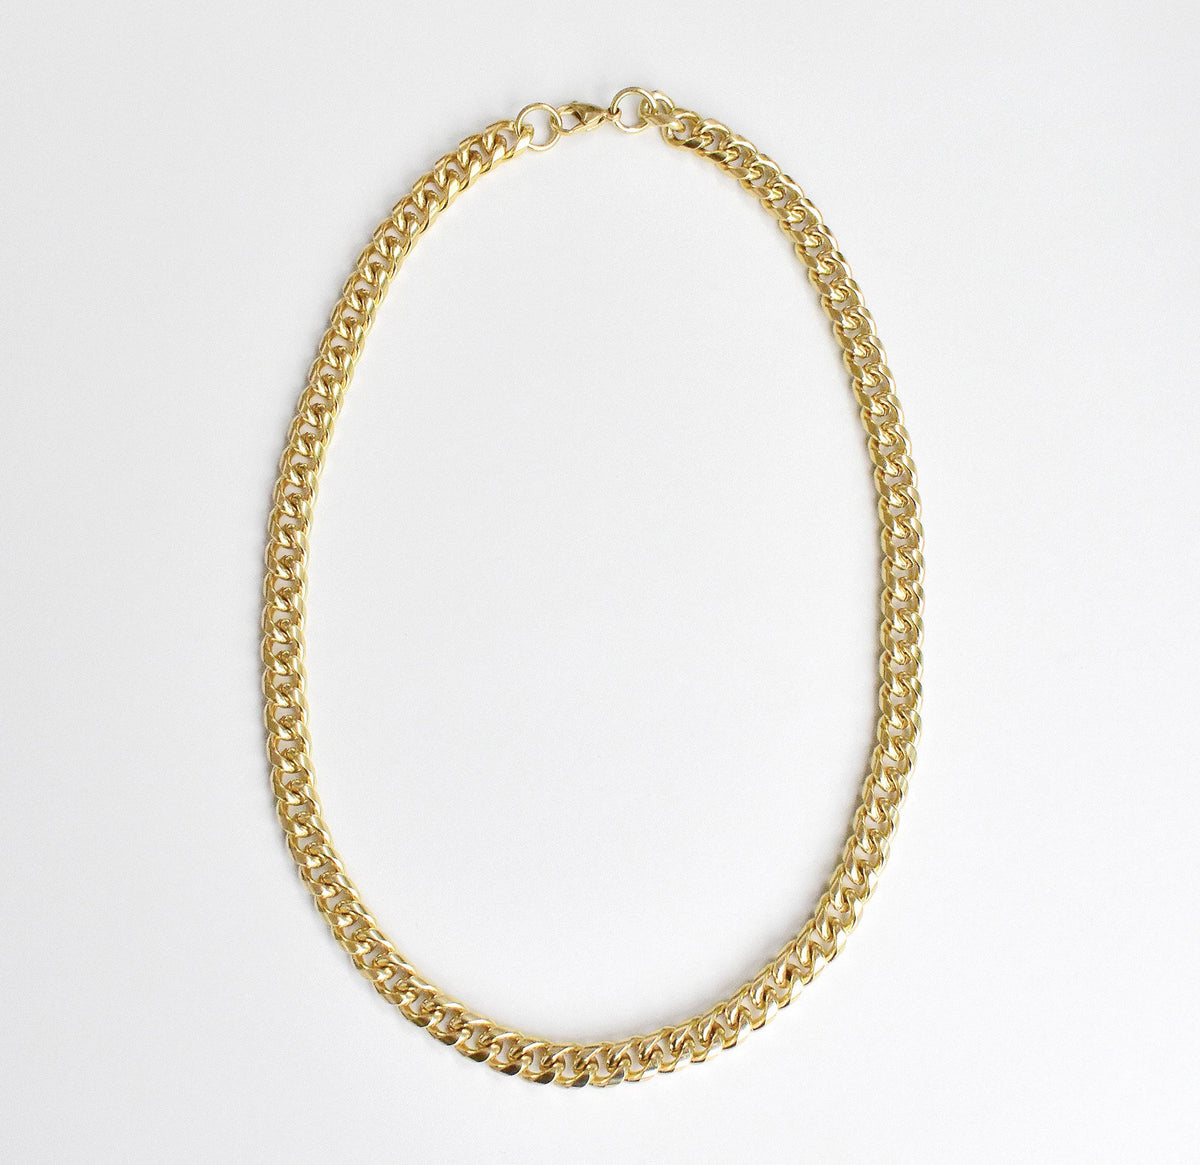 THICK GOLD CURB CHAIN NECKLACE WATERPROOF